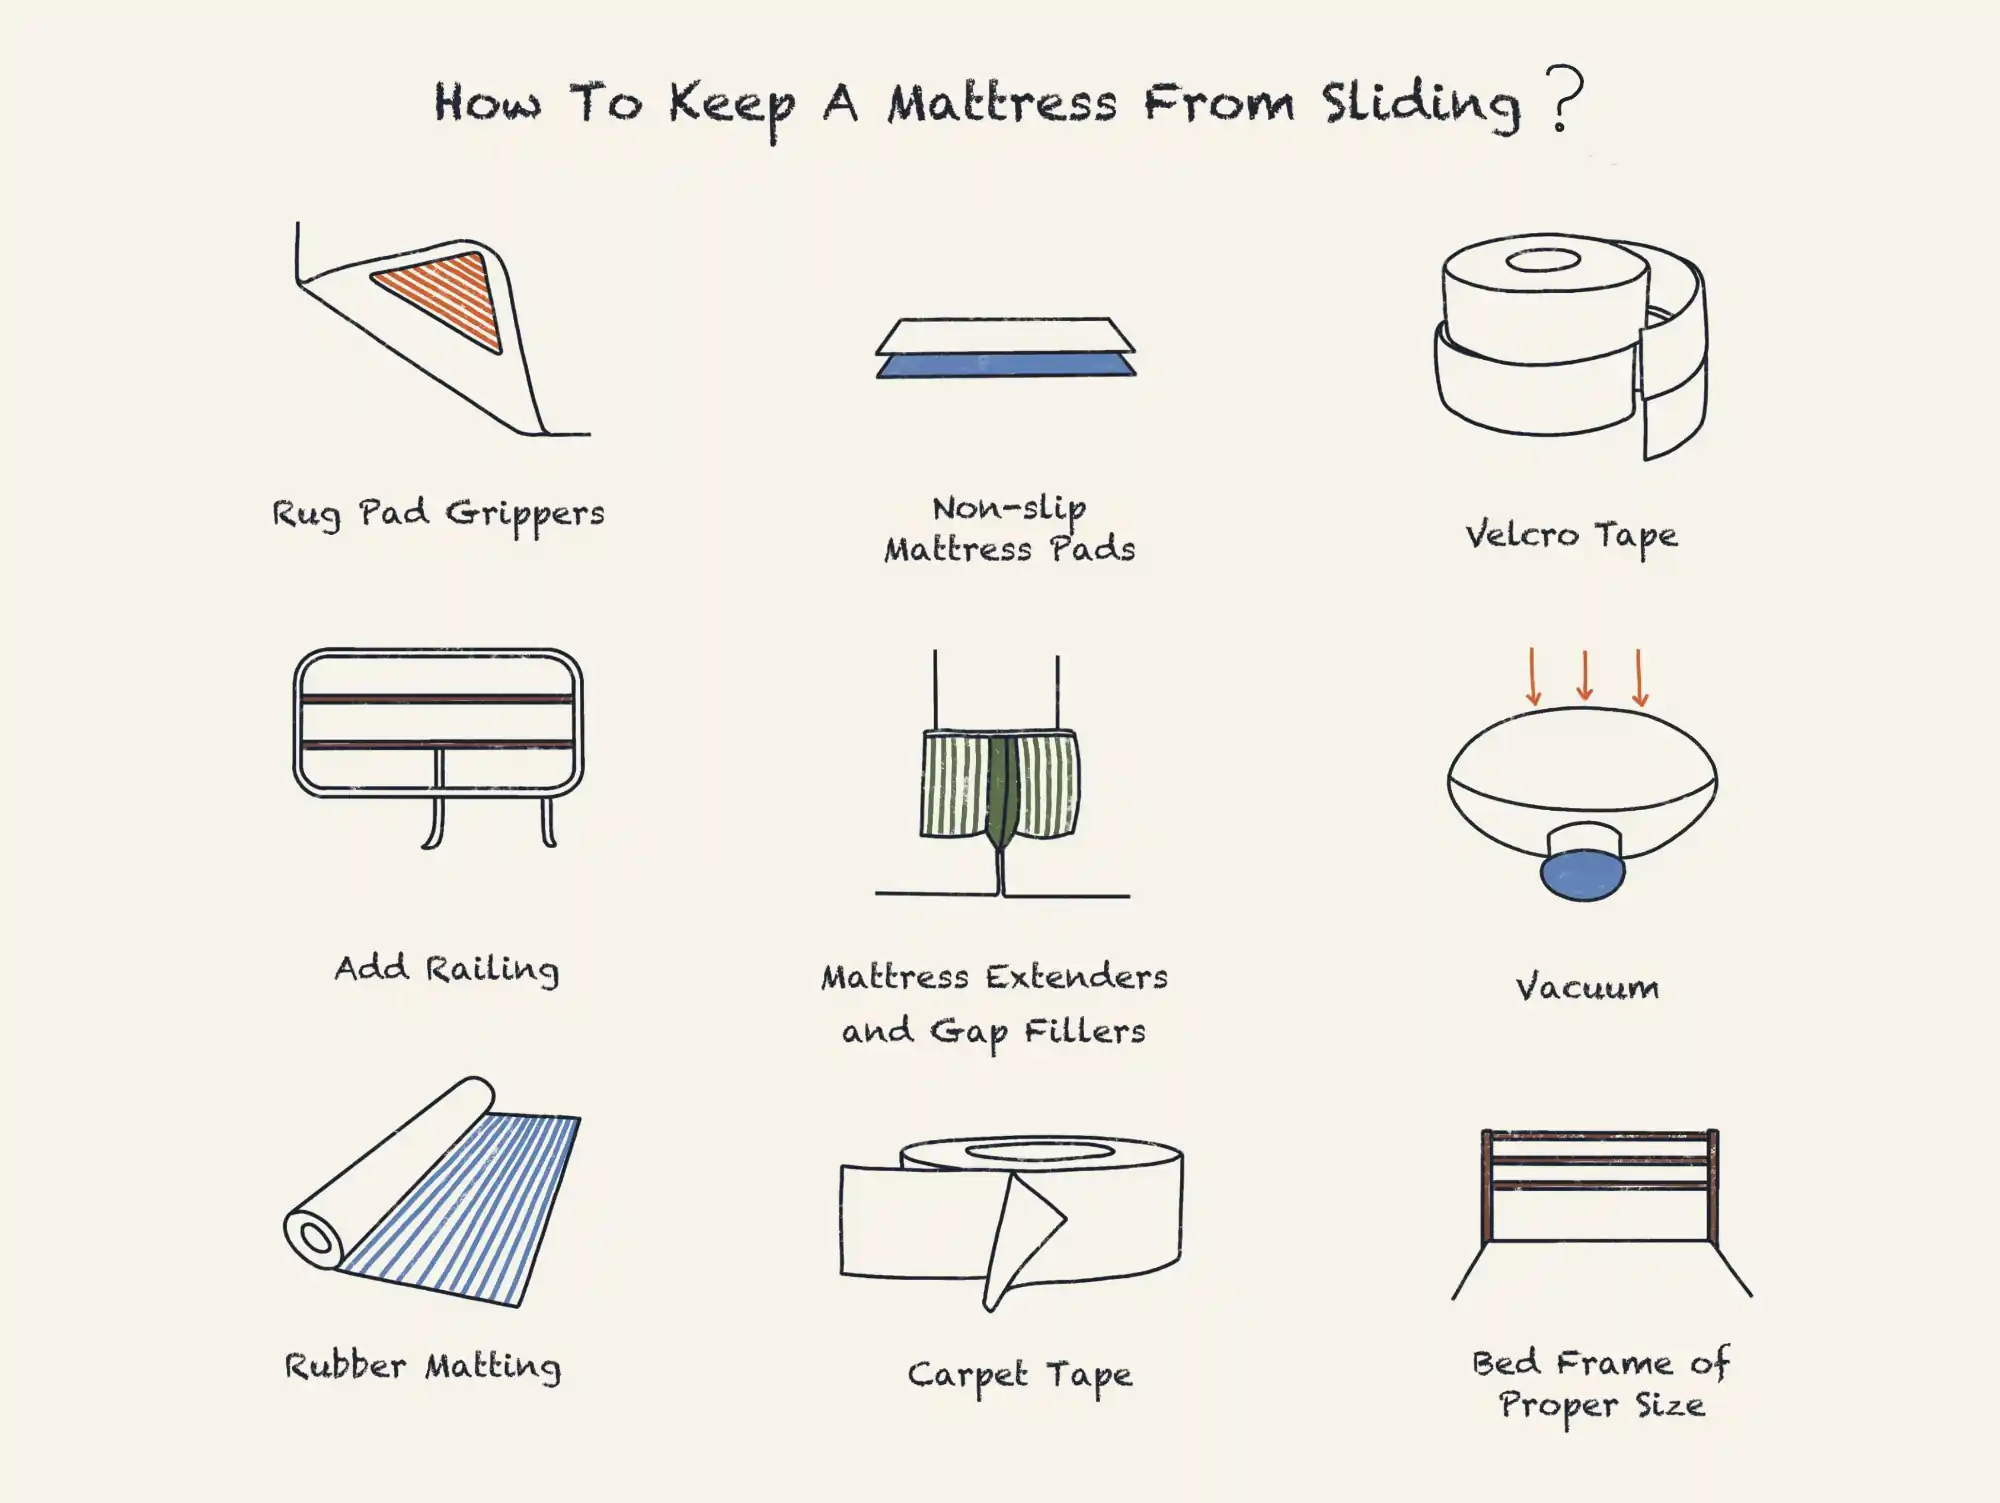 How to Keep Air Mattress from Sliding: Mastering Stability